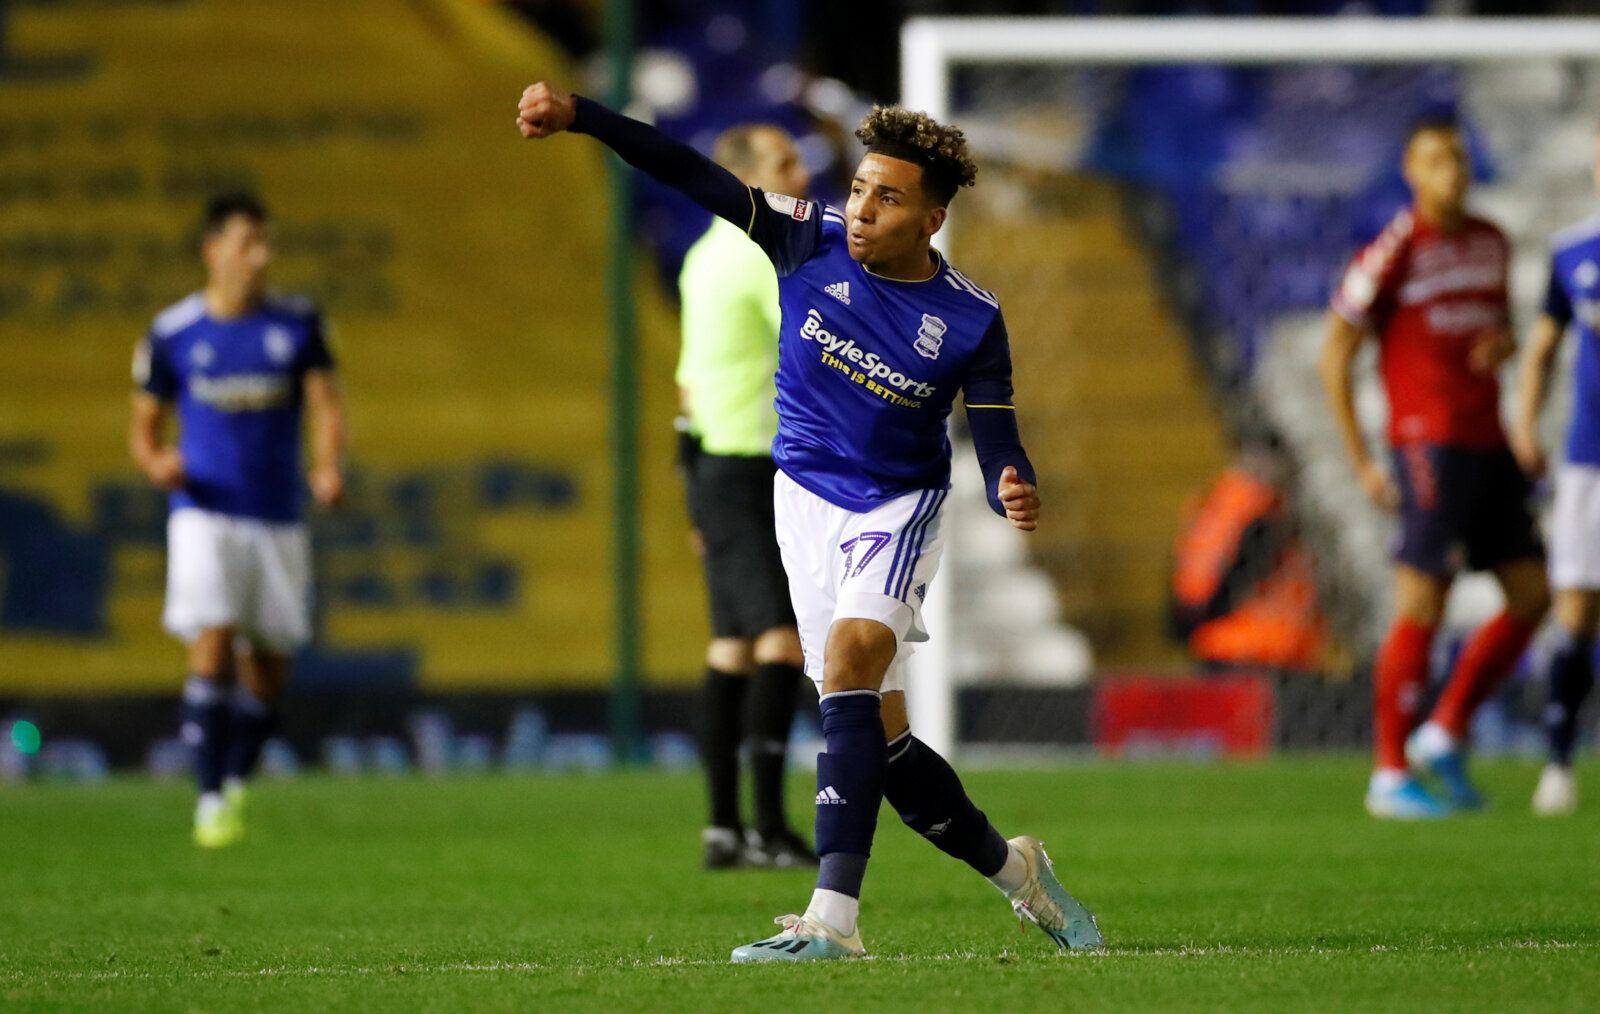 Soccer Football - Championship - Birmingham City v Middlesbrough - St Andrew's, Birmingham, Britain -October 4, 2019   Birmingham's Odin Bailey celebrates at the end of the match   Action Images/Andrew Boyers    EDITORIAL USE ONLY. No use with unauthorized audio, video, data, fixture lists, club/league logos or 